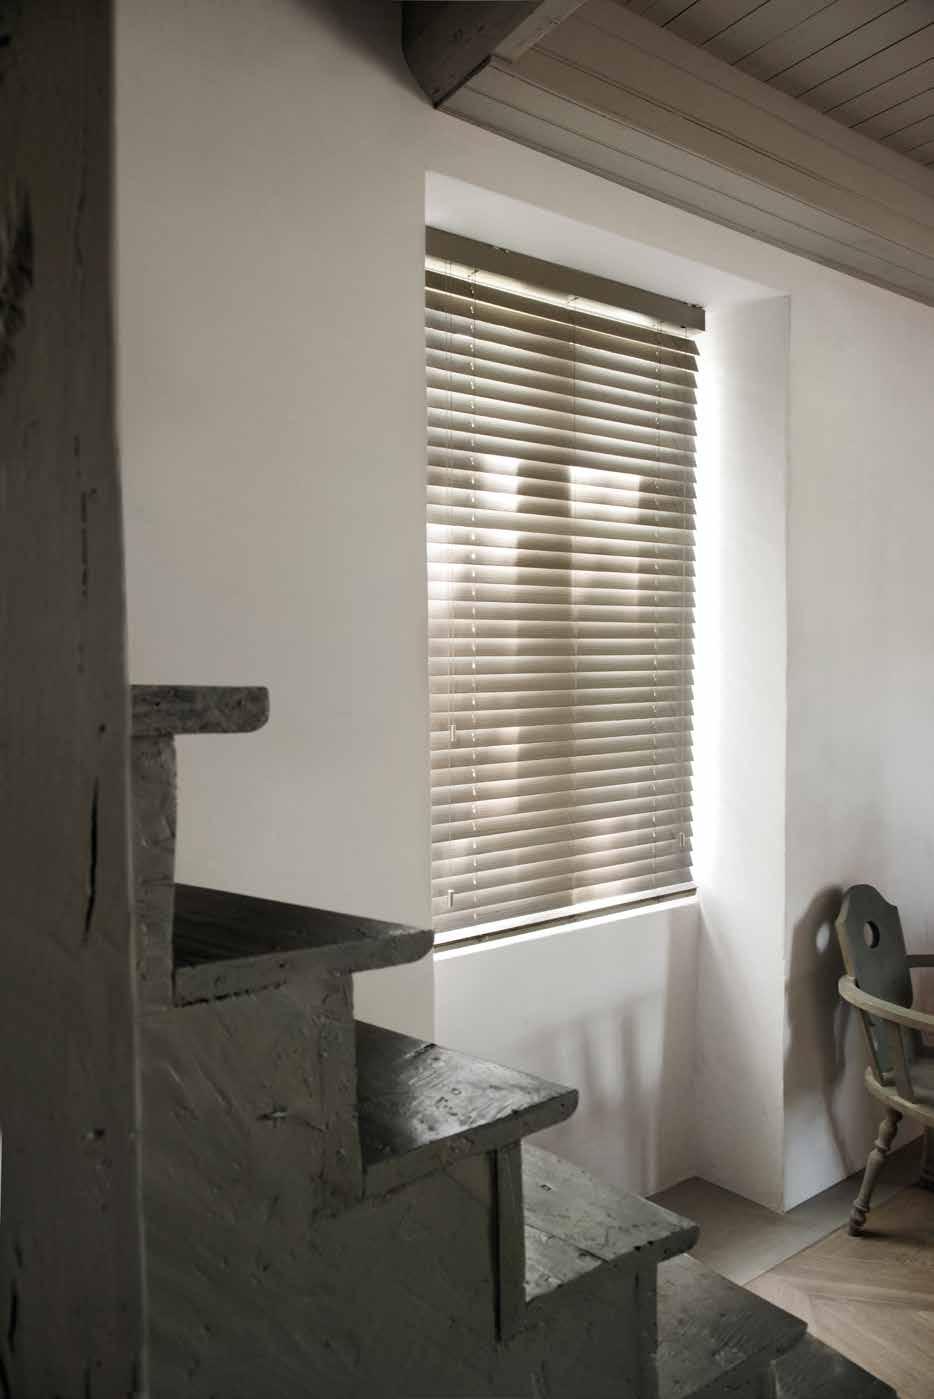 You can give your wooden blind a unique appeal by decorative tape in different colours.